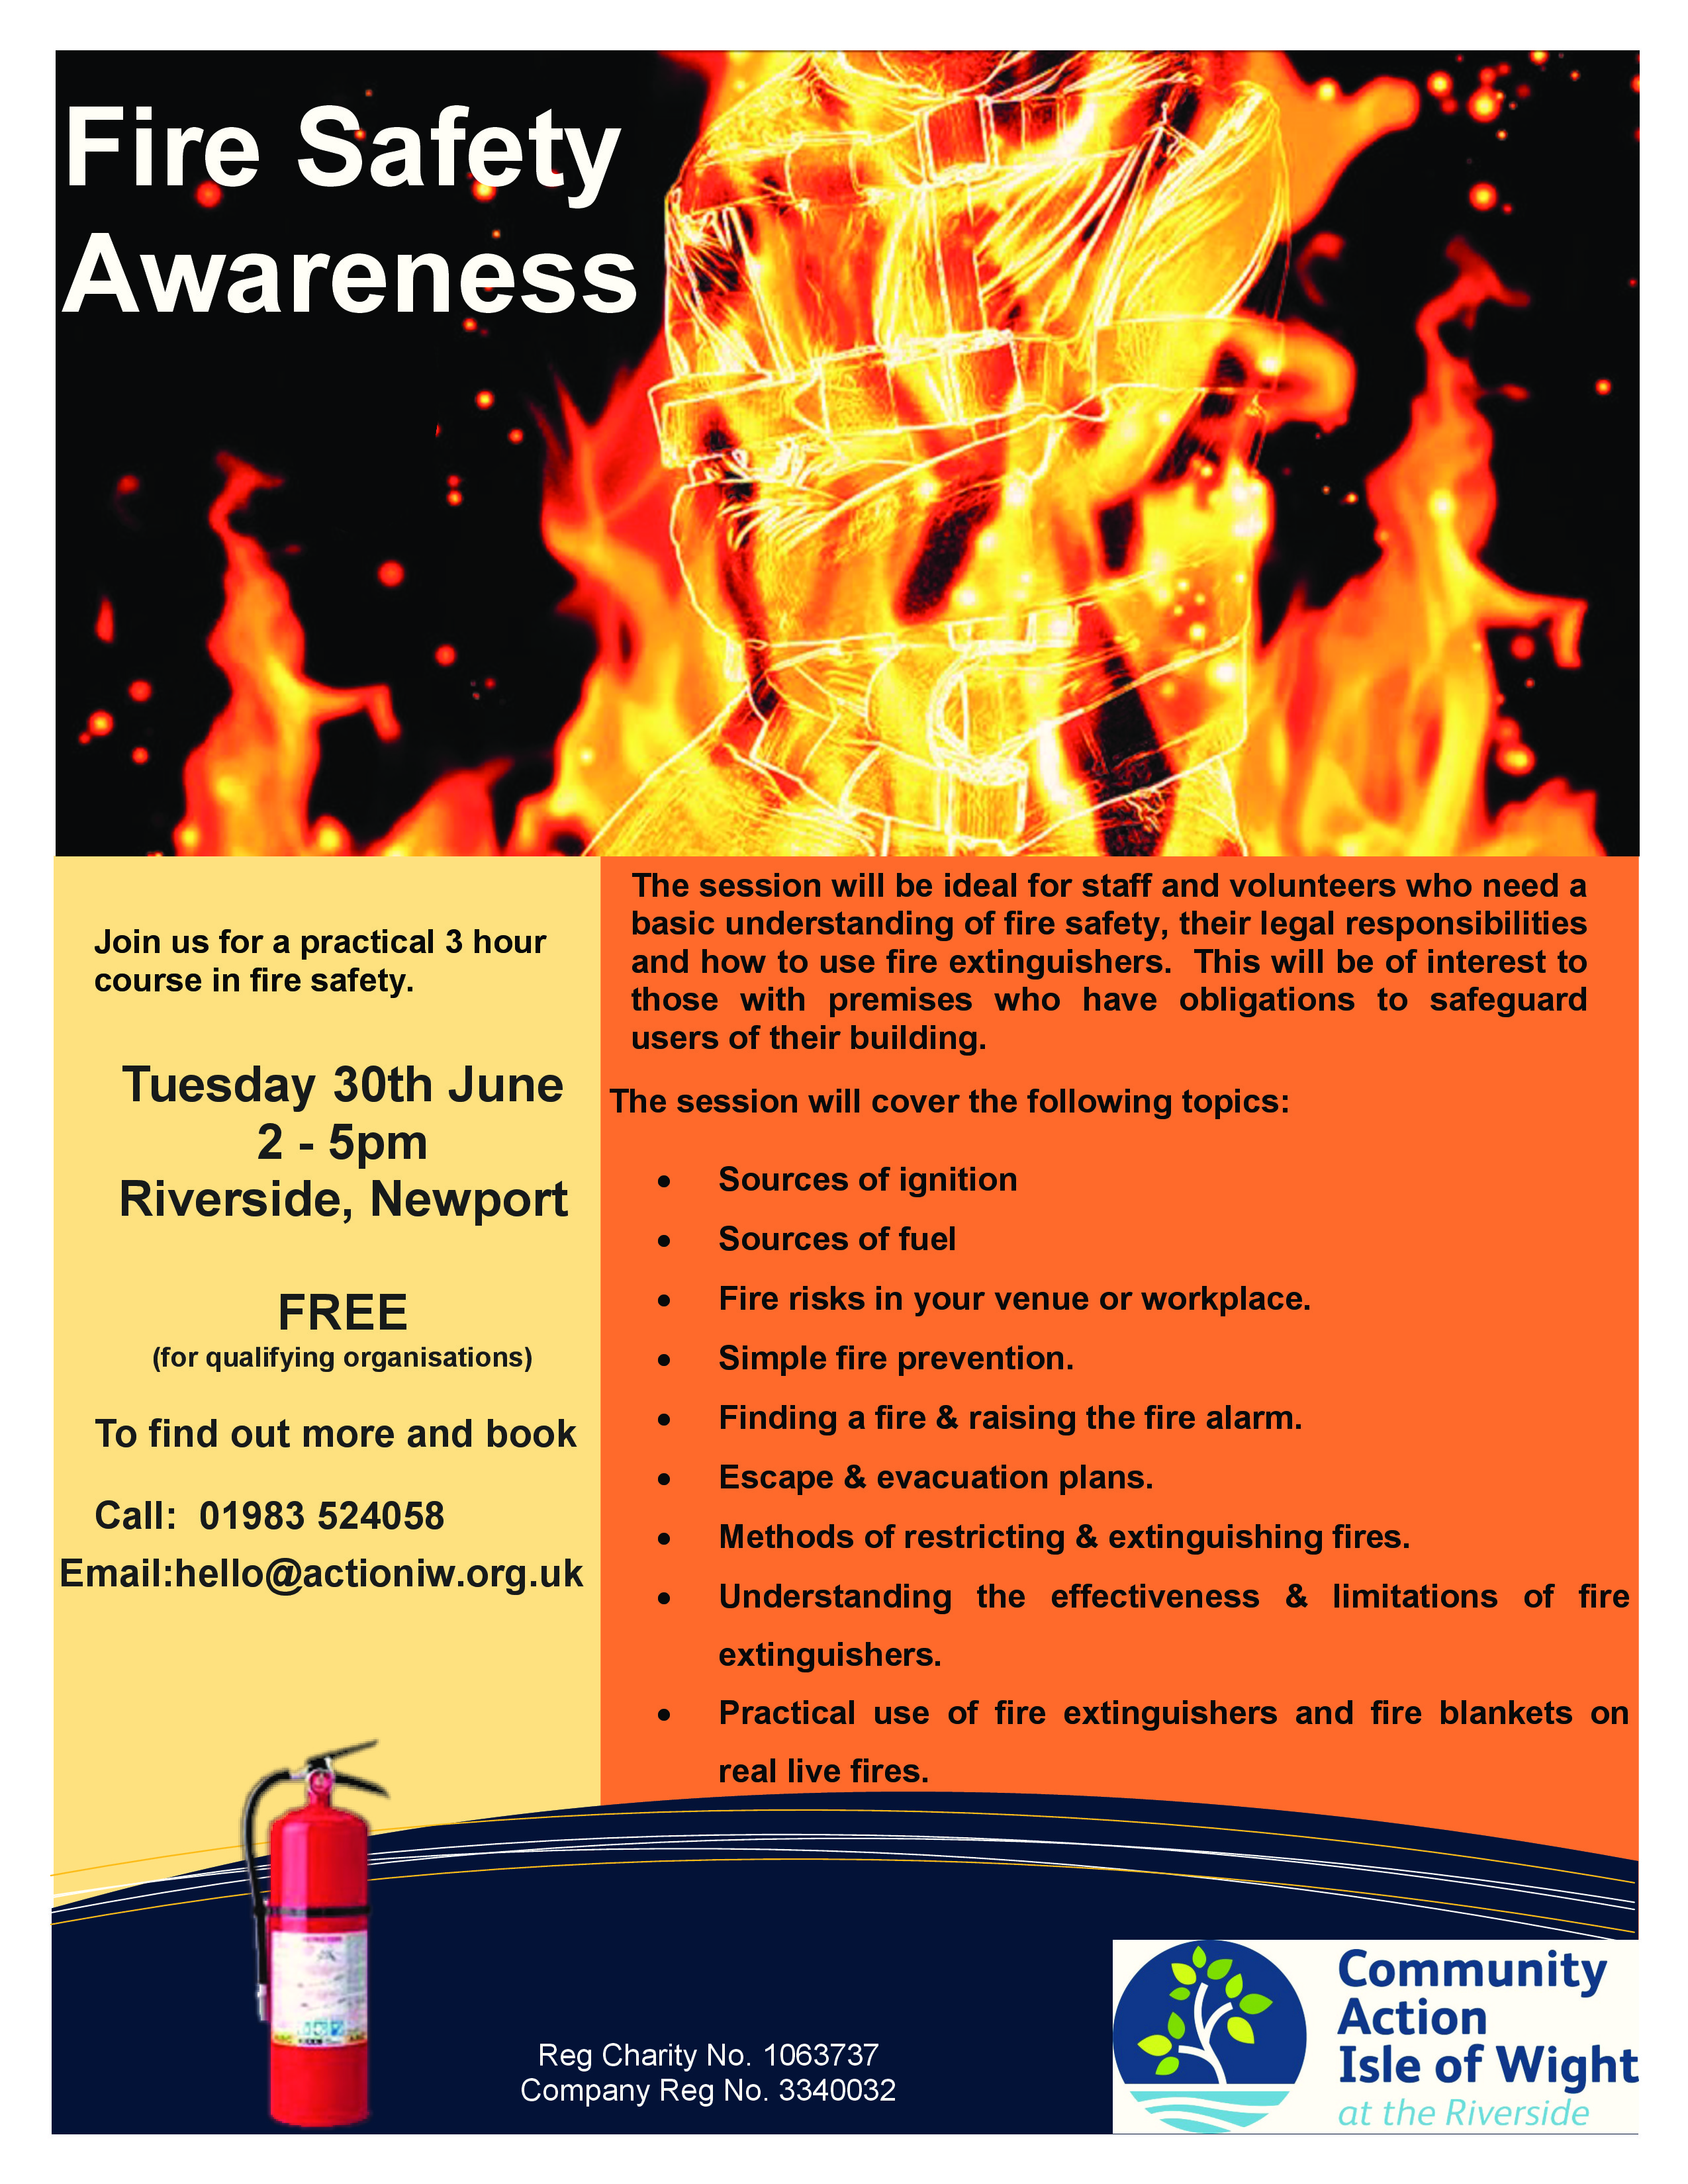 community-action-isle-of-wight-fire-safety-awareness-30th-june-2015-community-action-isle-of